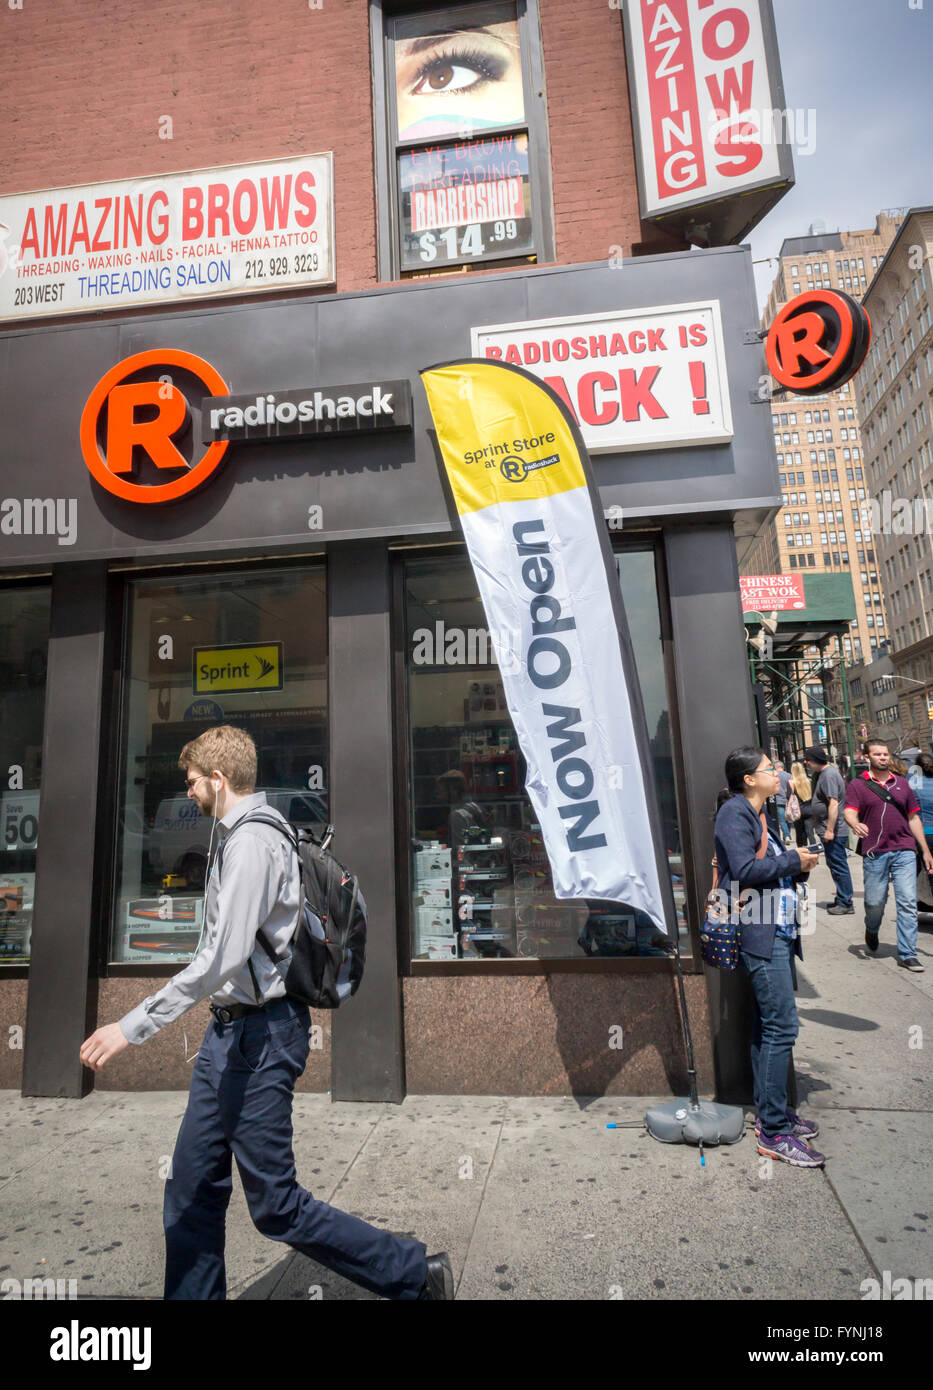 A rebranded RadioShack Sprint store in New York on Tuesday, April 26, 2016. After emerging from bankruptcy the slimmed down RadioShack, now owned by General Wireless, has a store-within-a-store partnership with Sprint. (© Richard B. Levine) Stock Photo